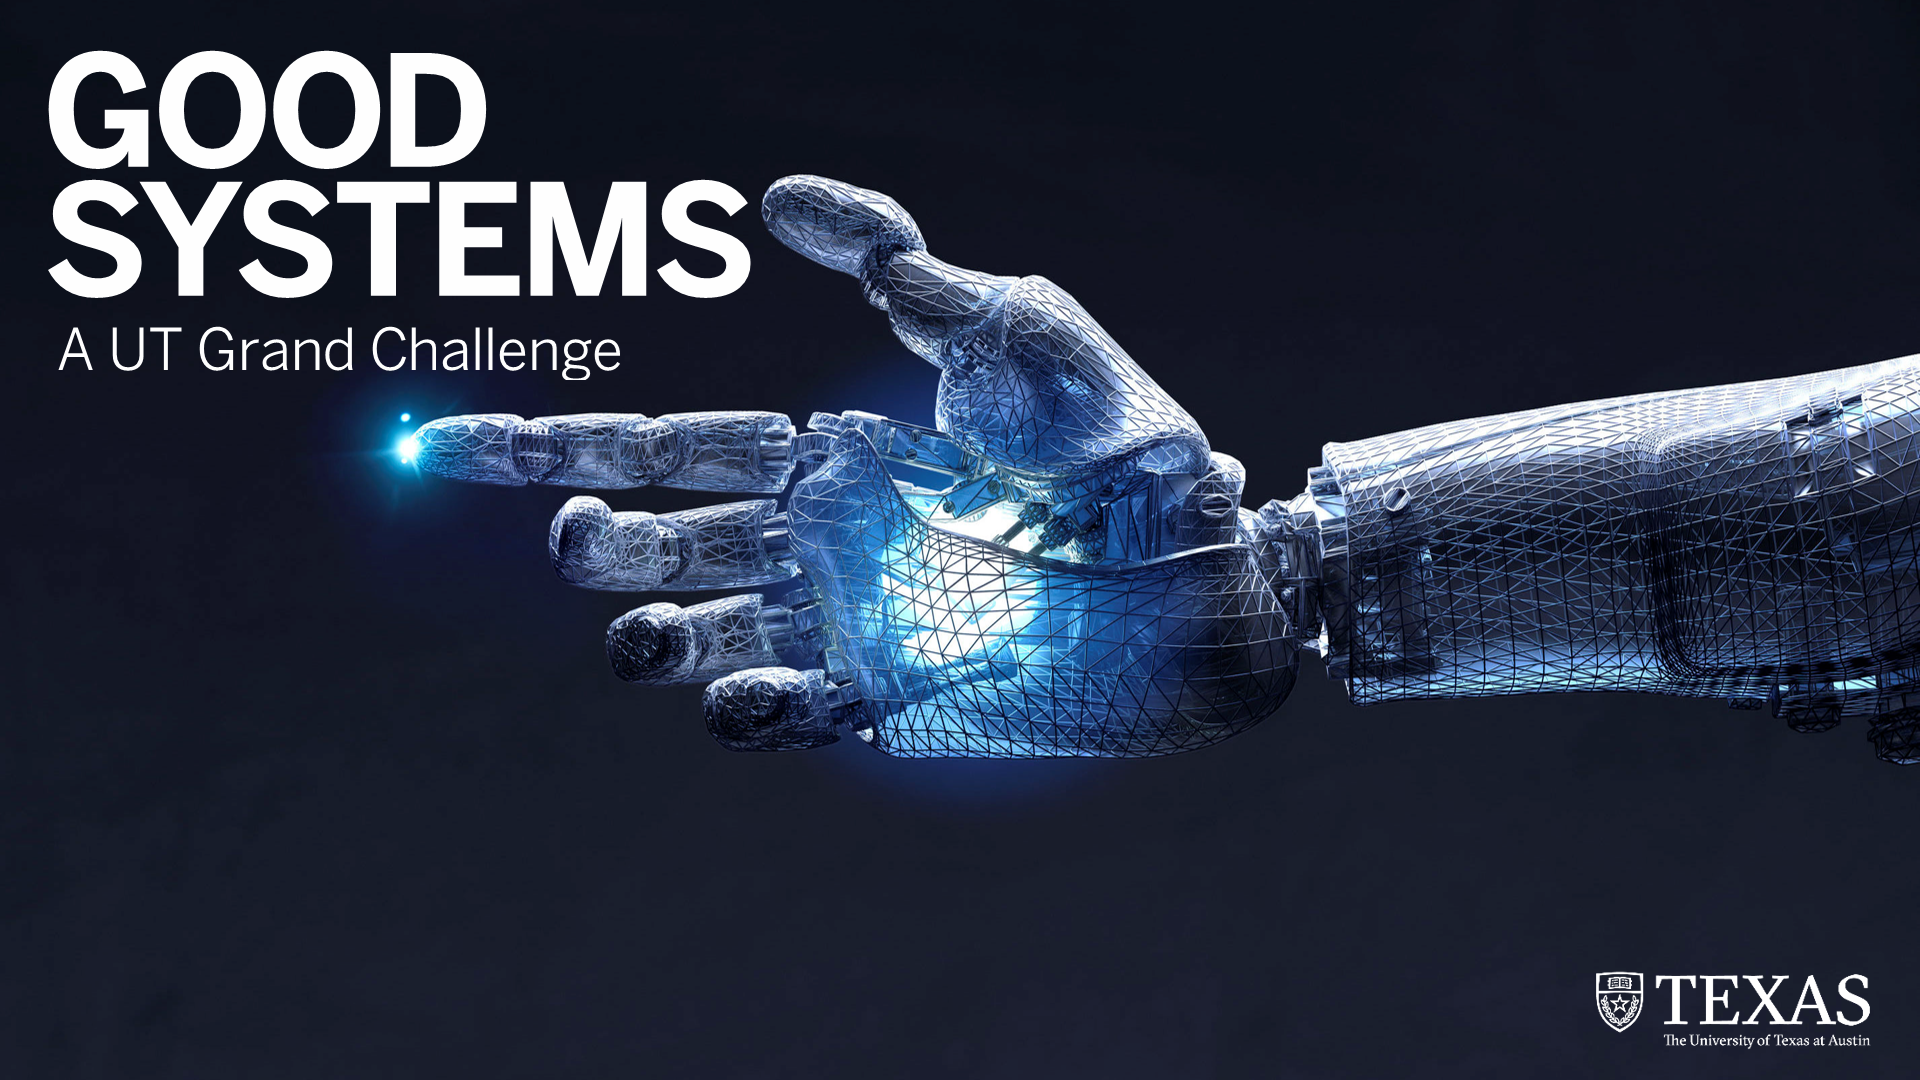 Good Systems: A UT Grand Challenge. Robot arm.